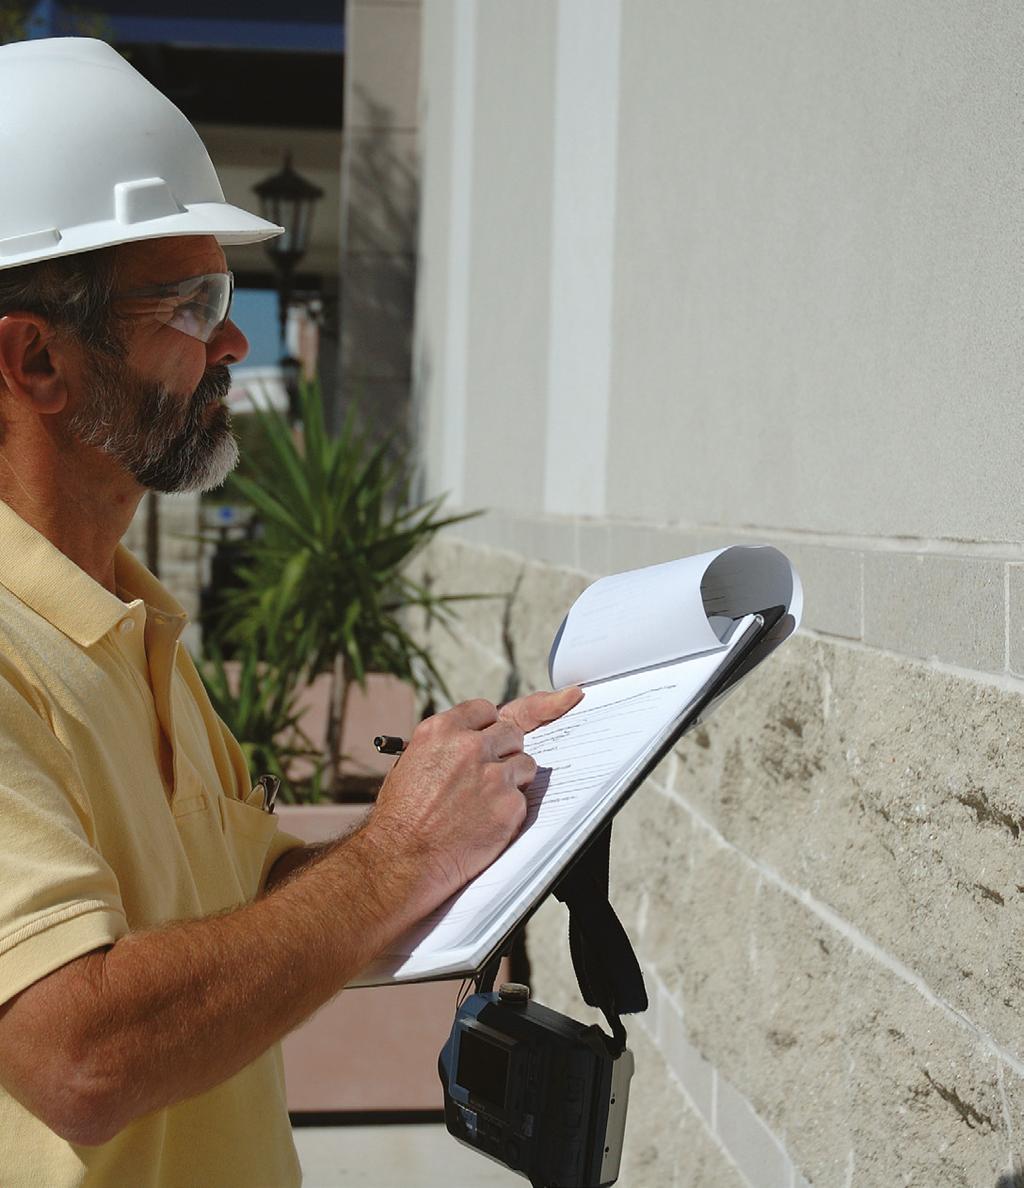 Regular inspection allows facility managers to maintain records of changes that progressively occur in the building enclosure, so that potential problems can be identified and corrected before